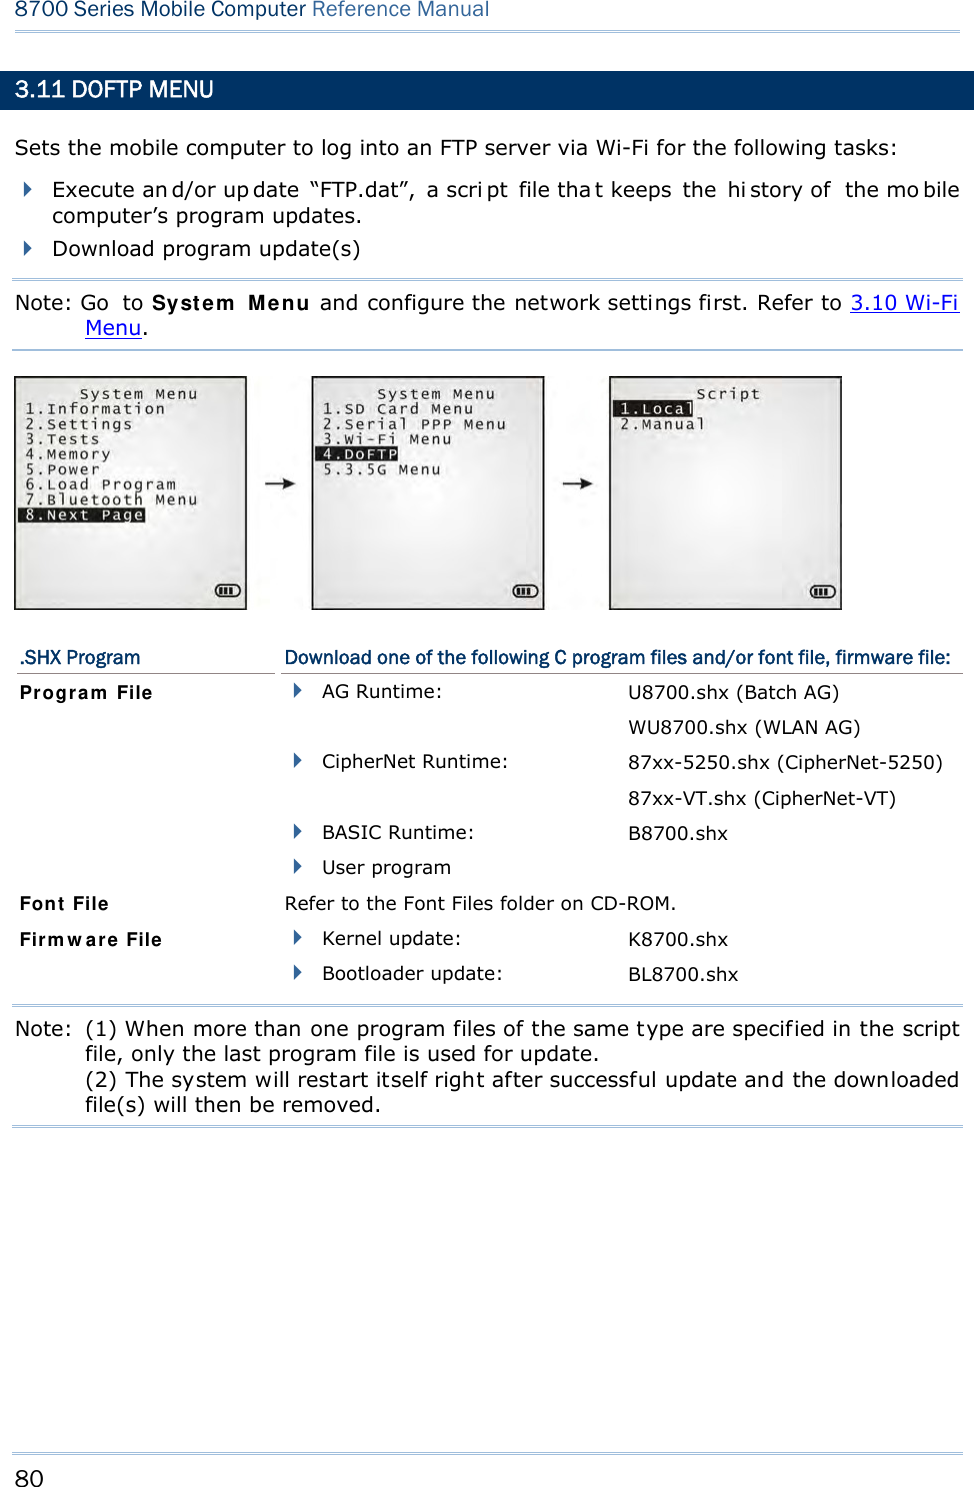 80  8700 Series Mobile Computer Reference Manual  3.11 DOFTP MENU Sets the mobile computer to log into an FTP server via Wi-Fi for the following tasks:  Execute an d/or up date “FTP.dat”, a scri pt file tha t keeps  the  hi story of  the mo bile computer’s program updates.  Download program update(s) Note: Go to System Menu and configure the network settings first. Refer to 3.10 Wi-Fi Menu.  .SHX Program  Download one of the following C program files and/or font file, firmware file:  AG Runtime:  U8700.shx (Batch AG) WU8700.shx (WLAN AG)  CipherNet Runtime:  87xx-5250.shx (CipherNet-5250) 87xx-VT.shx (CipherNet-VT)  BASIC Runtime:  B8700.shx Program File  User program   Font File  Refer to the Font Files folder on CD-ROM.  Kernel update:  K8700.shx Firmware File  Bootloader update:  BL8700.shx Note:  (1) When more than one program files of the same type are specified in the script file, only the last program file is used for update. (2) The system will restart itself right after successful update and the downloaded file(s) will then be removed.    